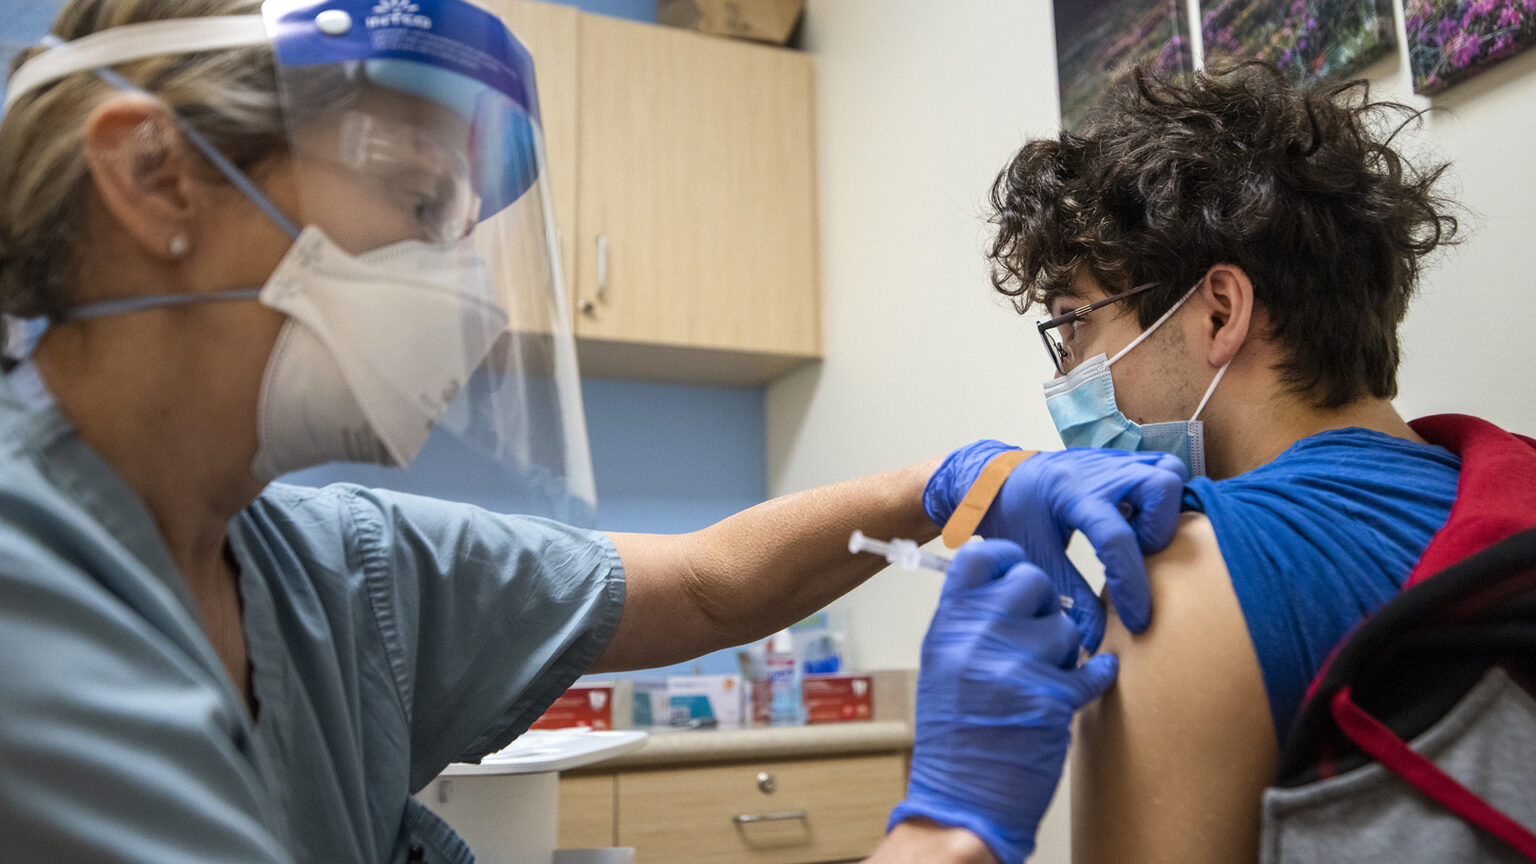 A vaccinator gives a COVID-19 booster shot to a teenager in a medical exam room.